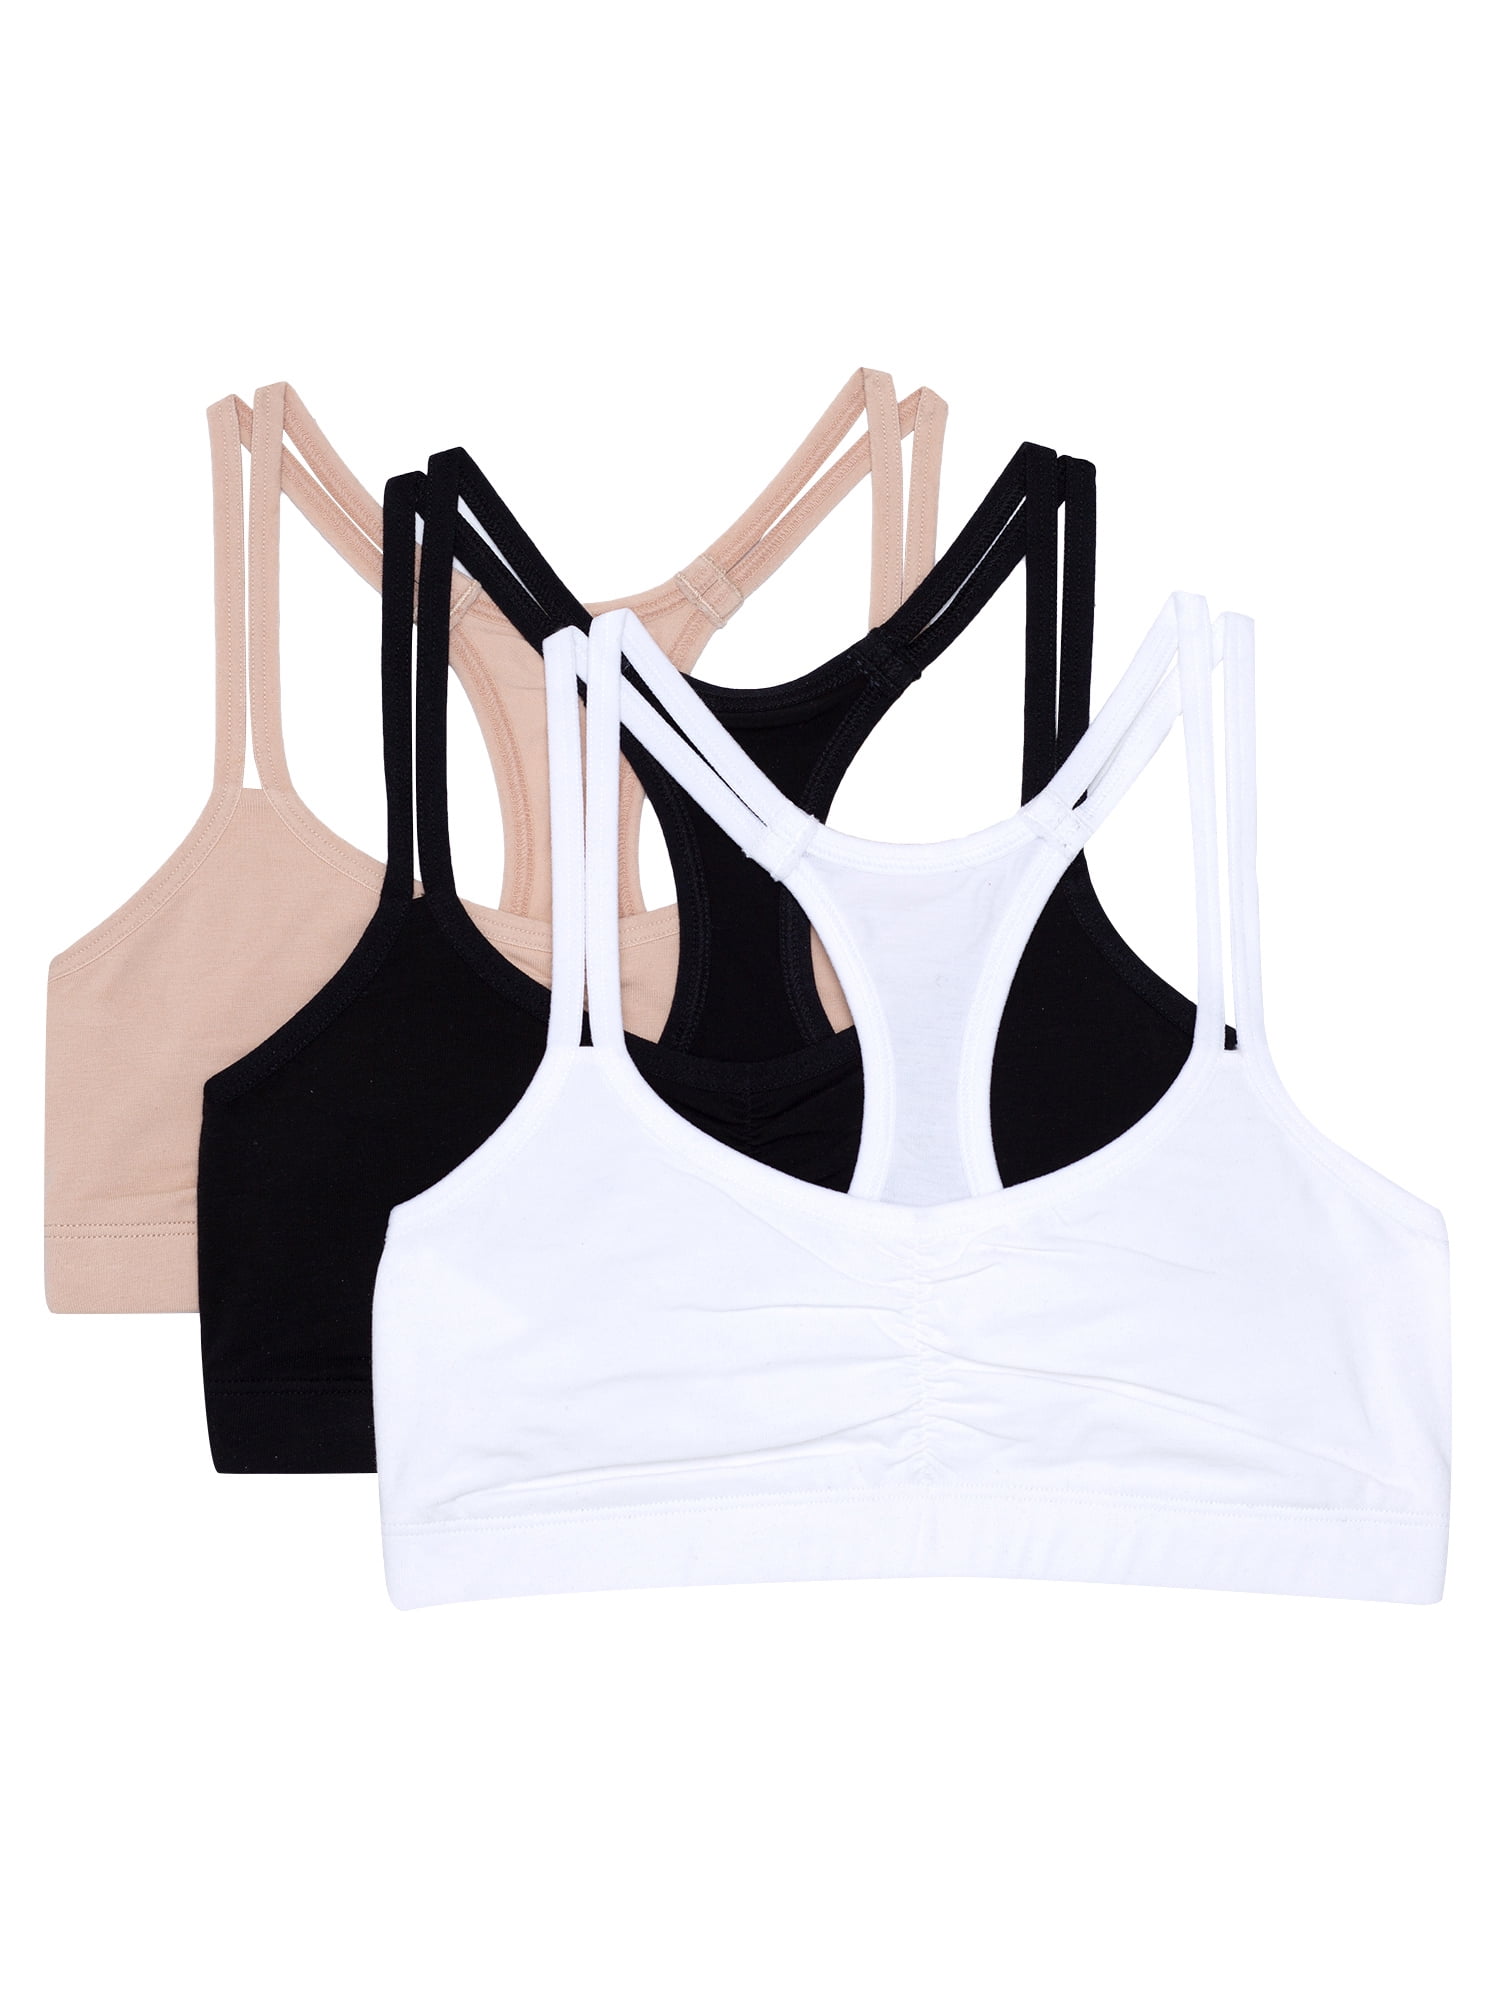 Fruit of the Loom Girls Cotton Stretch Sports Bra, 3-Pack Sizes 28-40